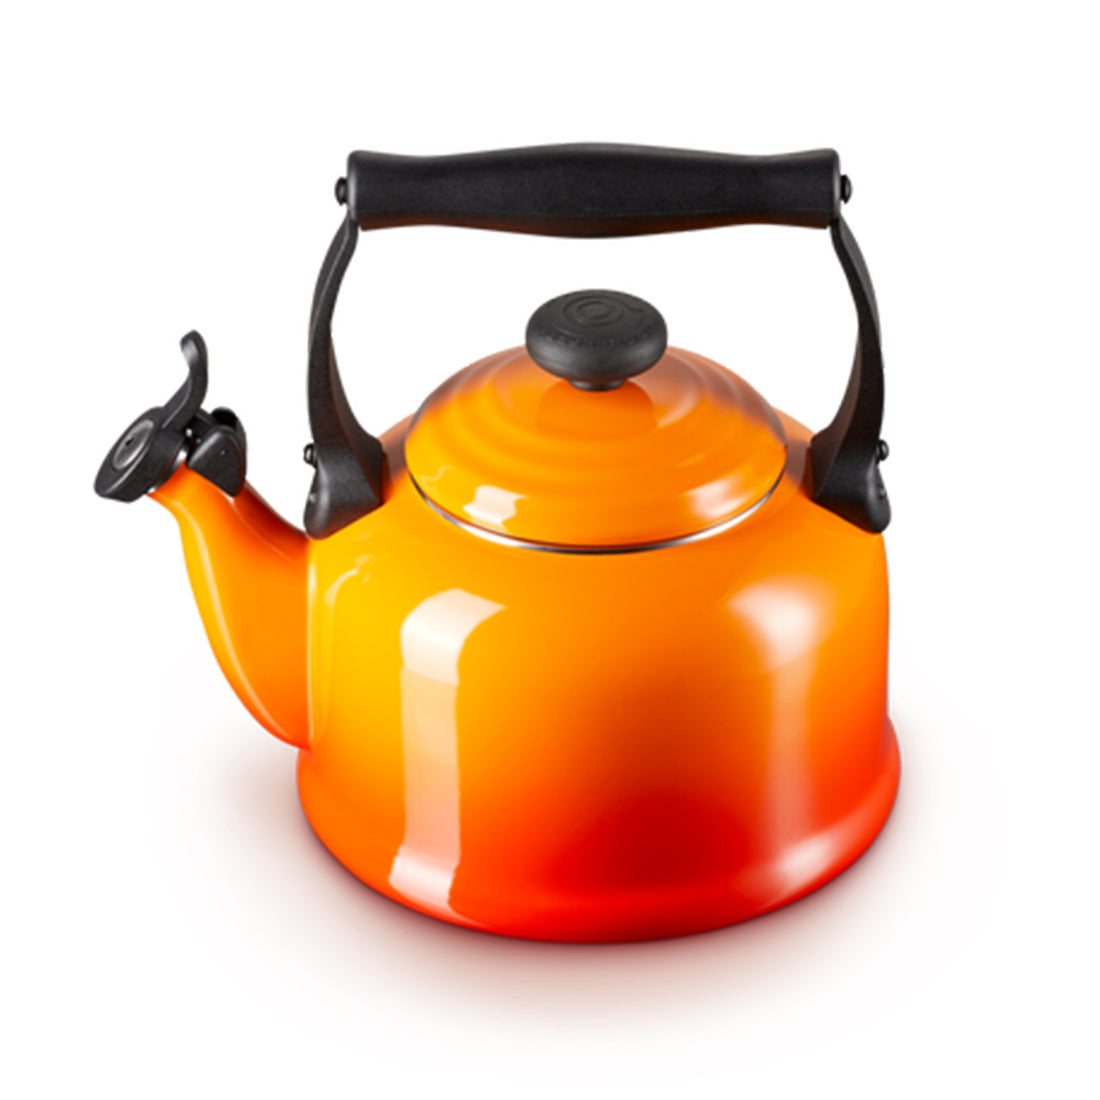 Le Creuset, Le Creuset Stoneware Traditional Kettle - Volcanic, Redber Coffee